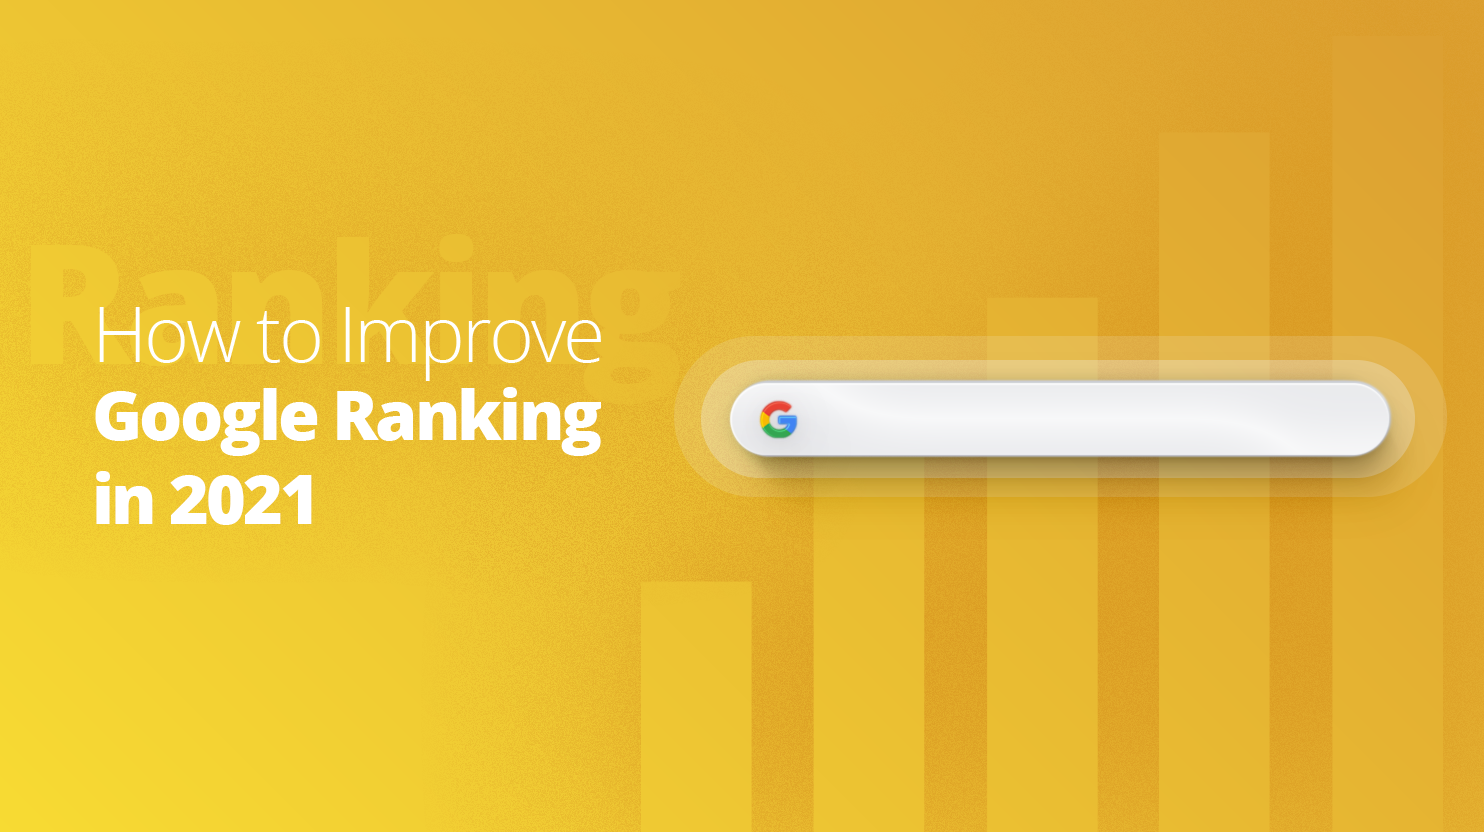 Over yellow background, white text says "How to improve Google ranking in 2021"